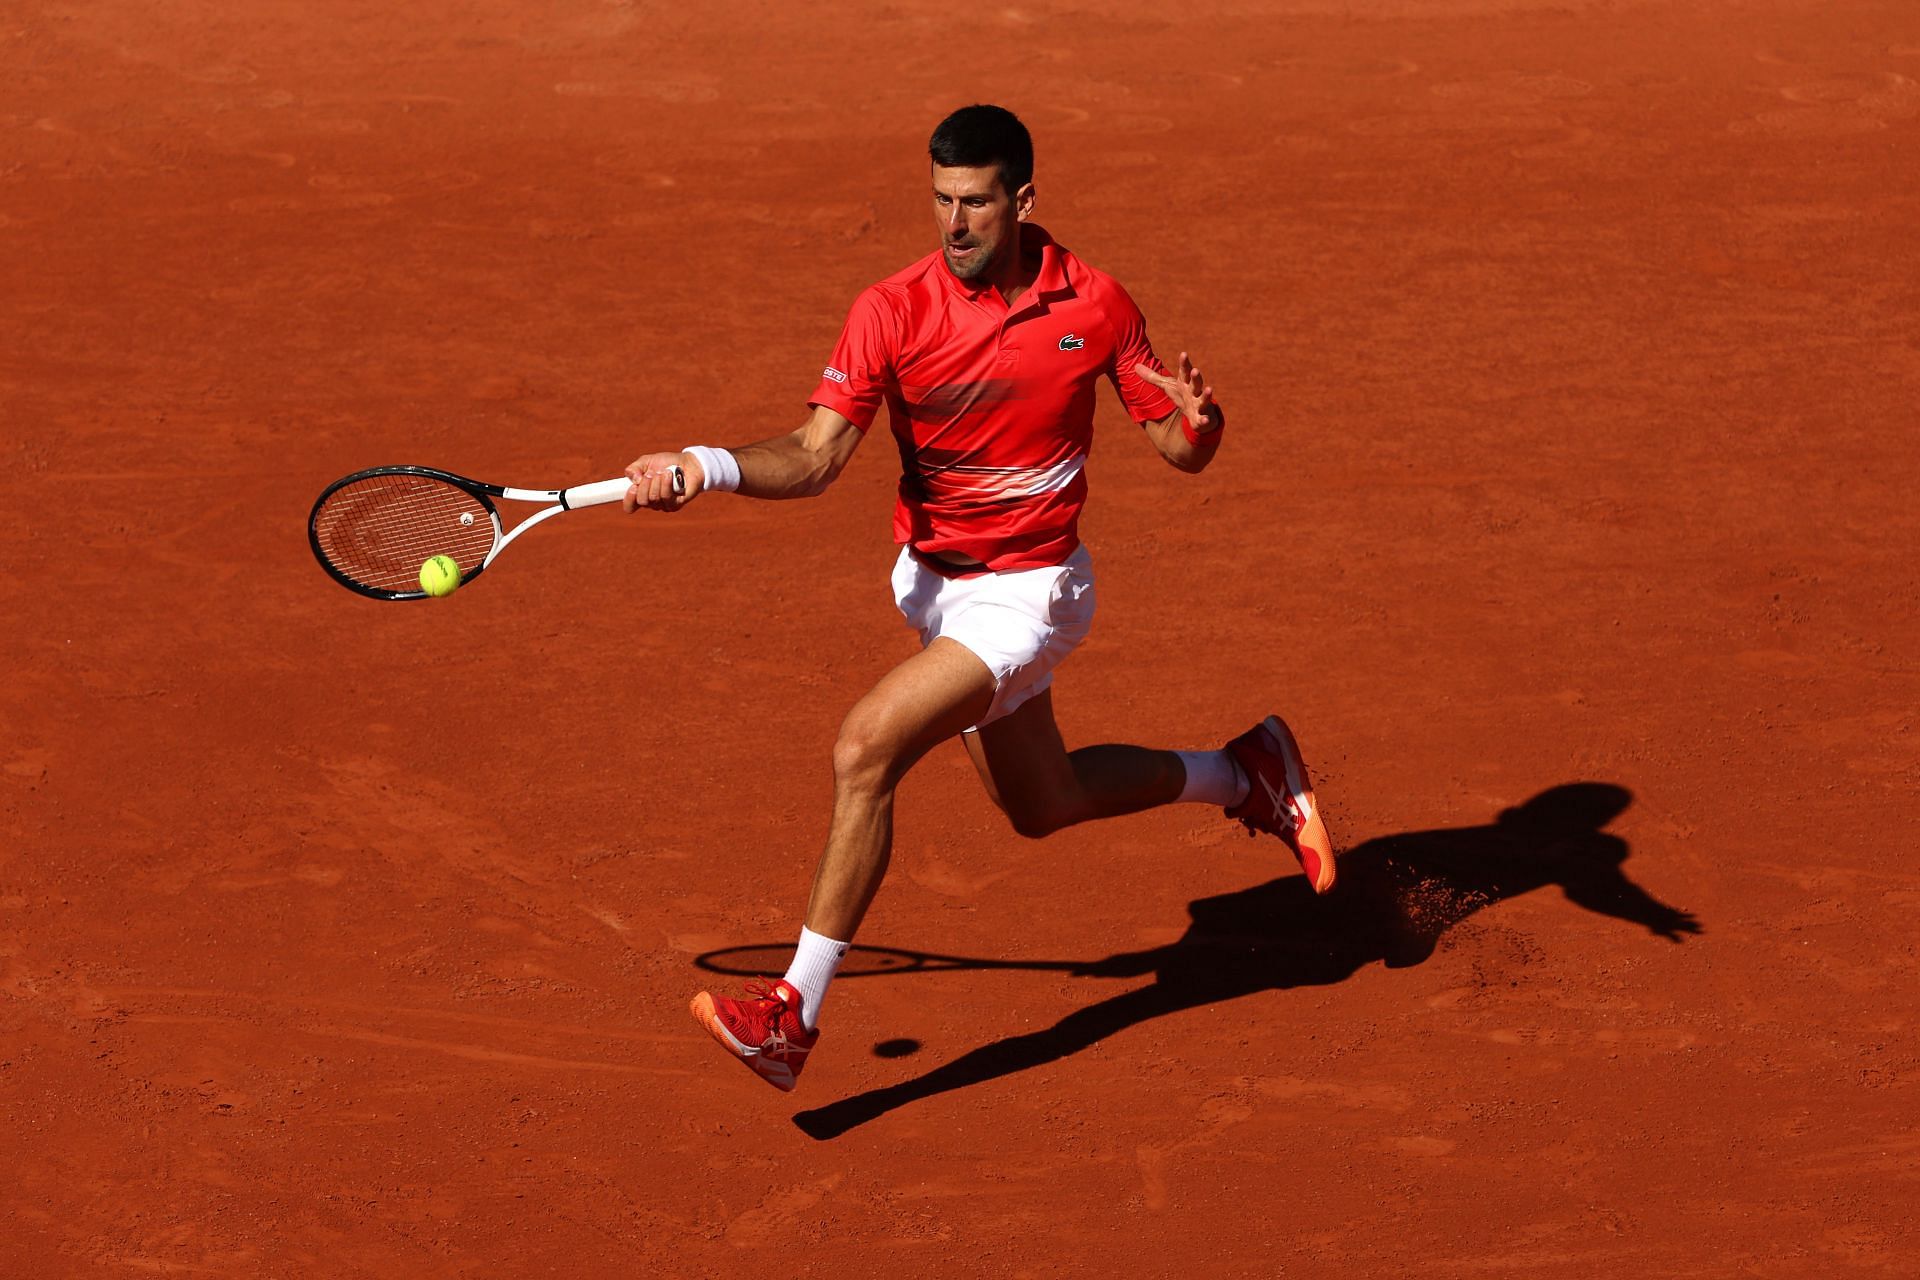 Novak Djokovic in action at the 2022 French Open.